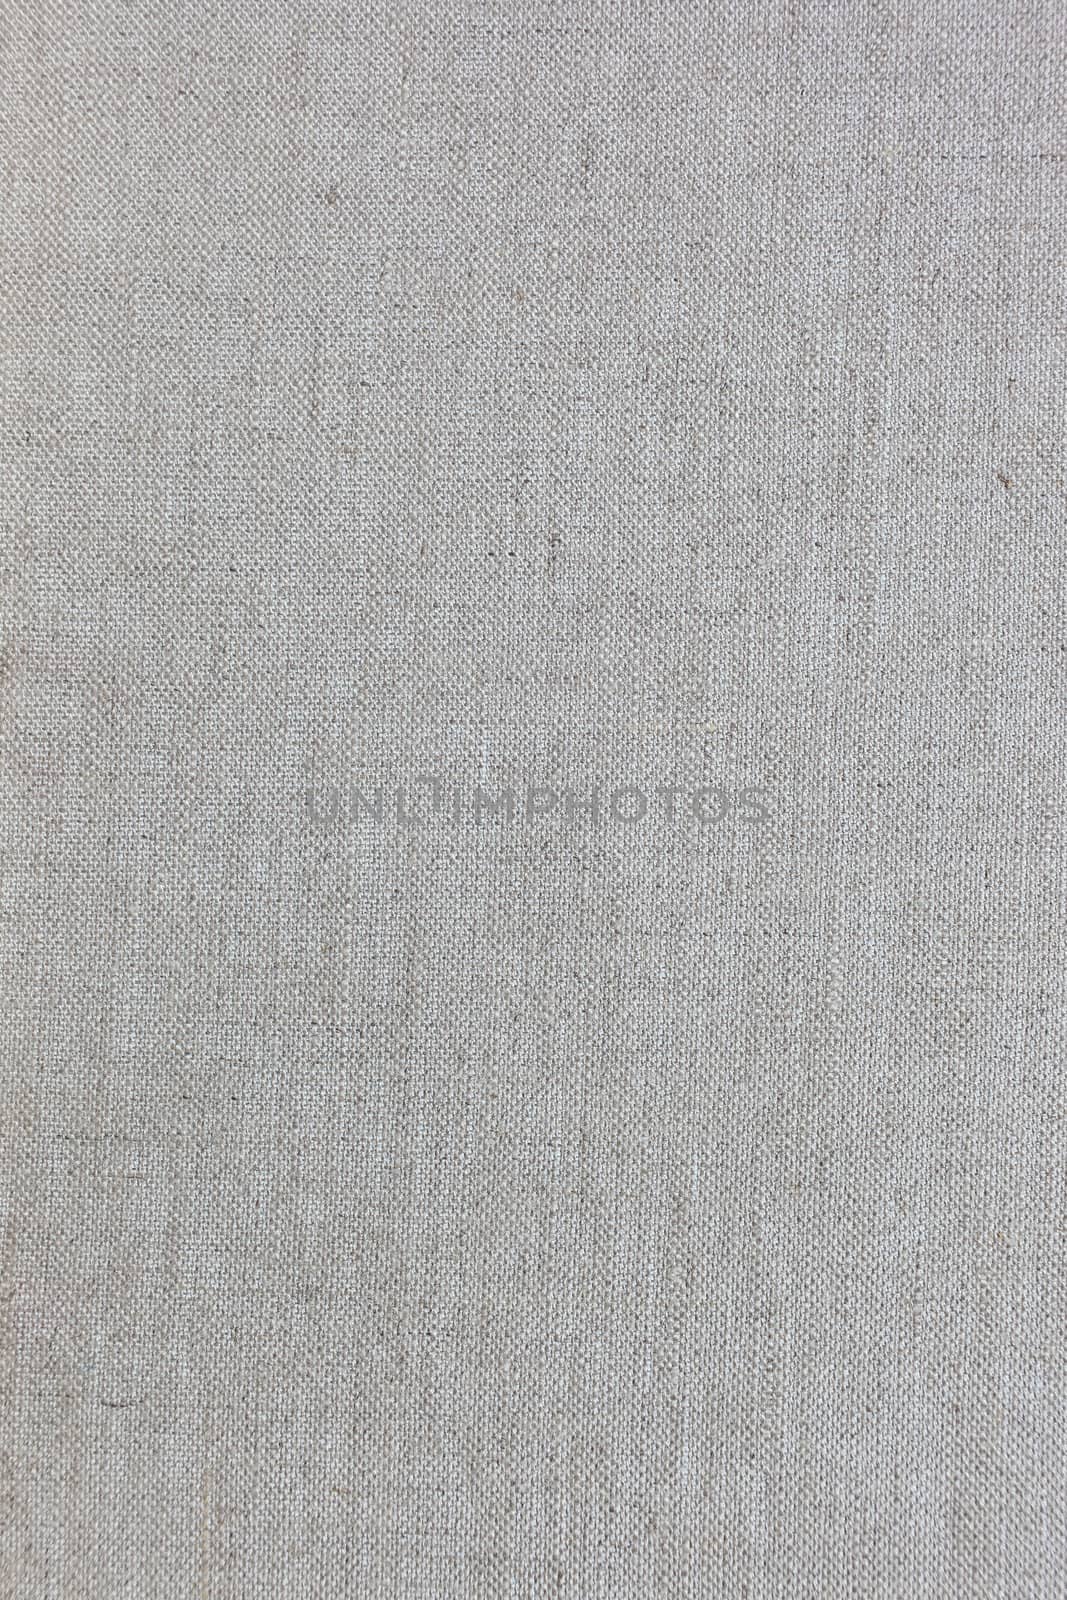 Fine linen canvas fabric texture for background